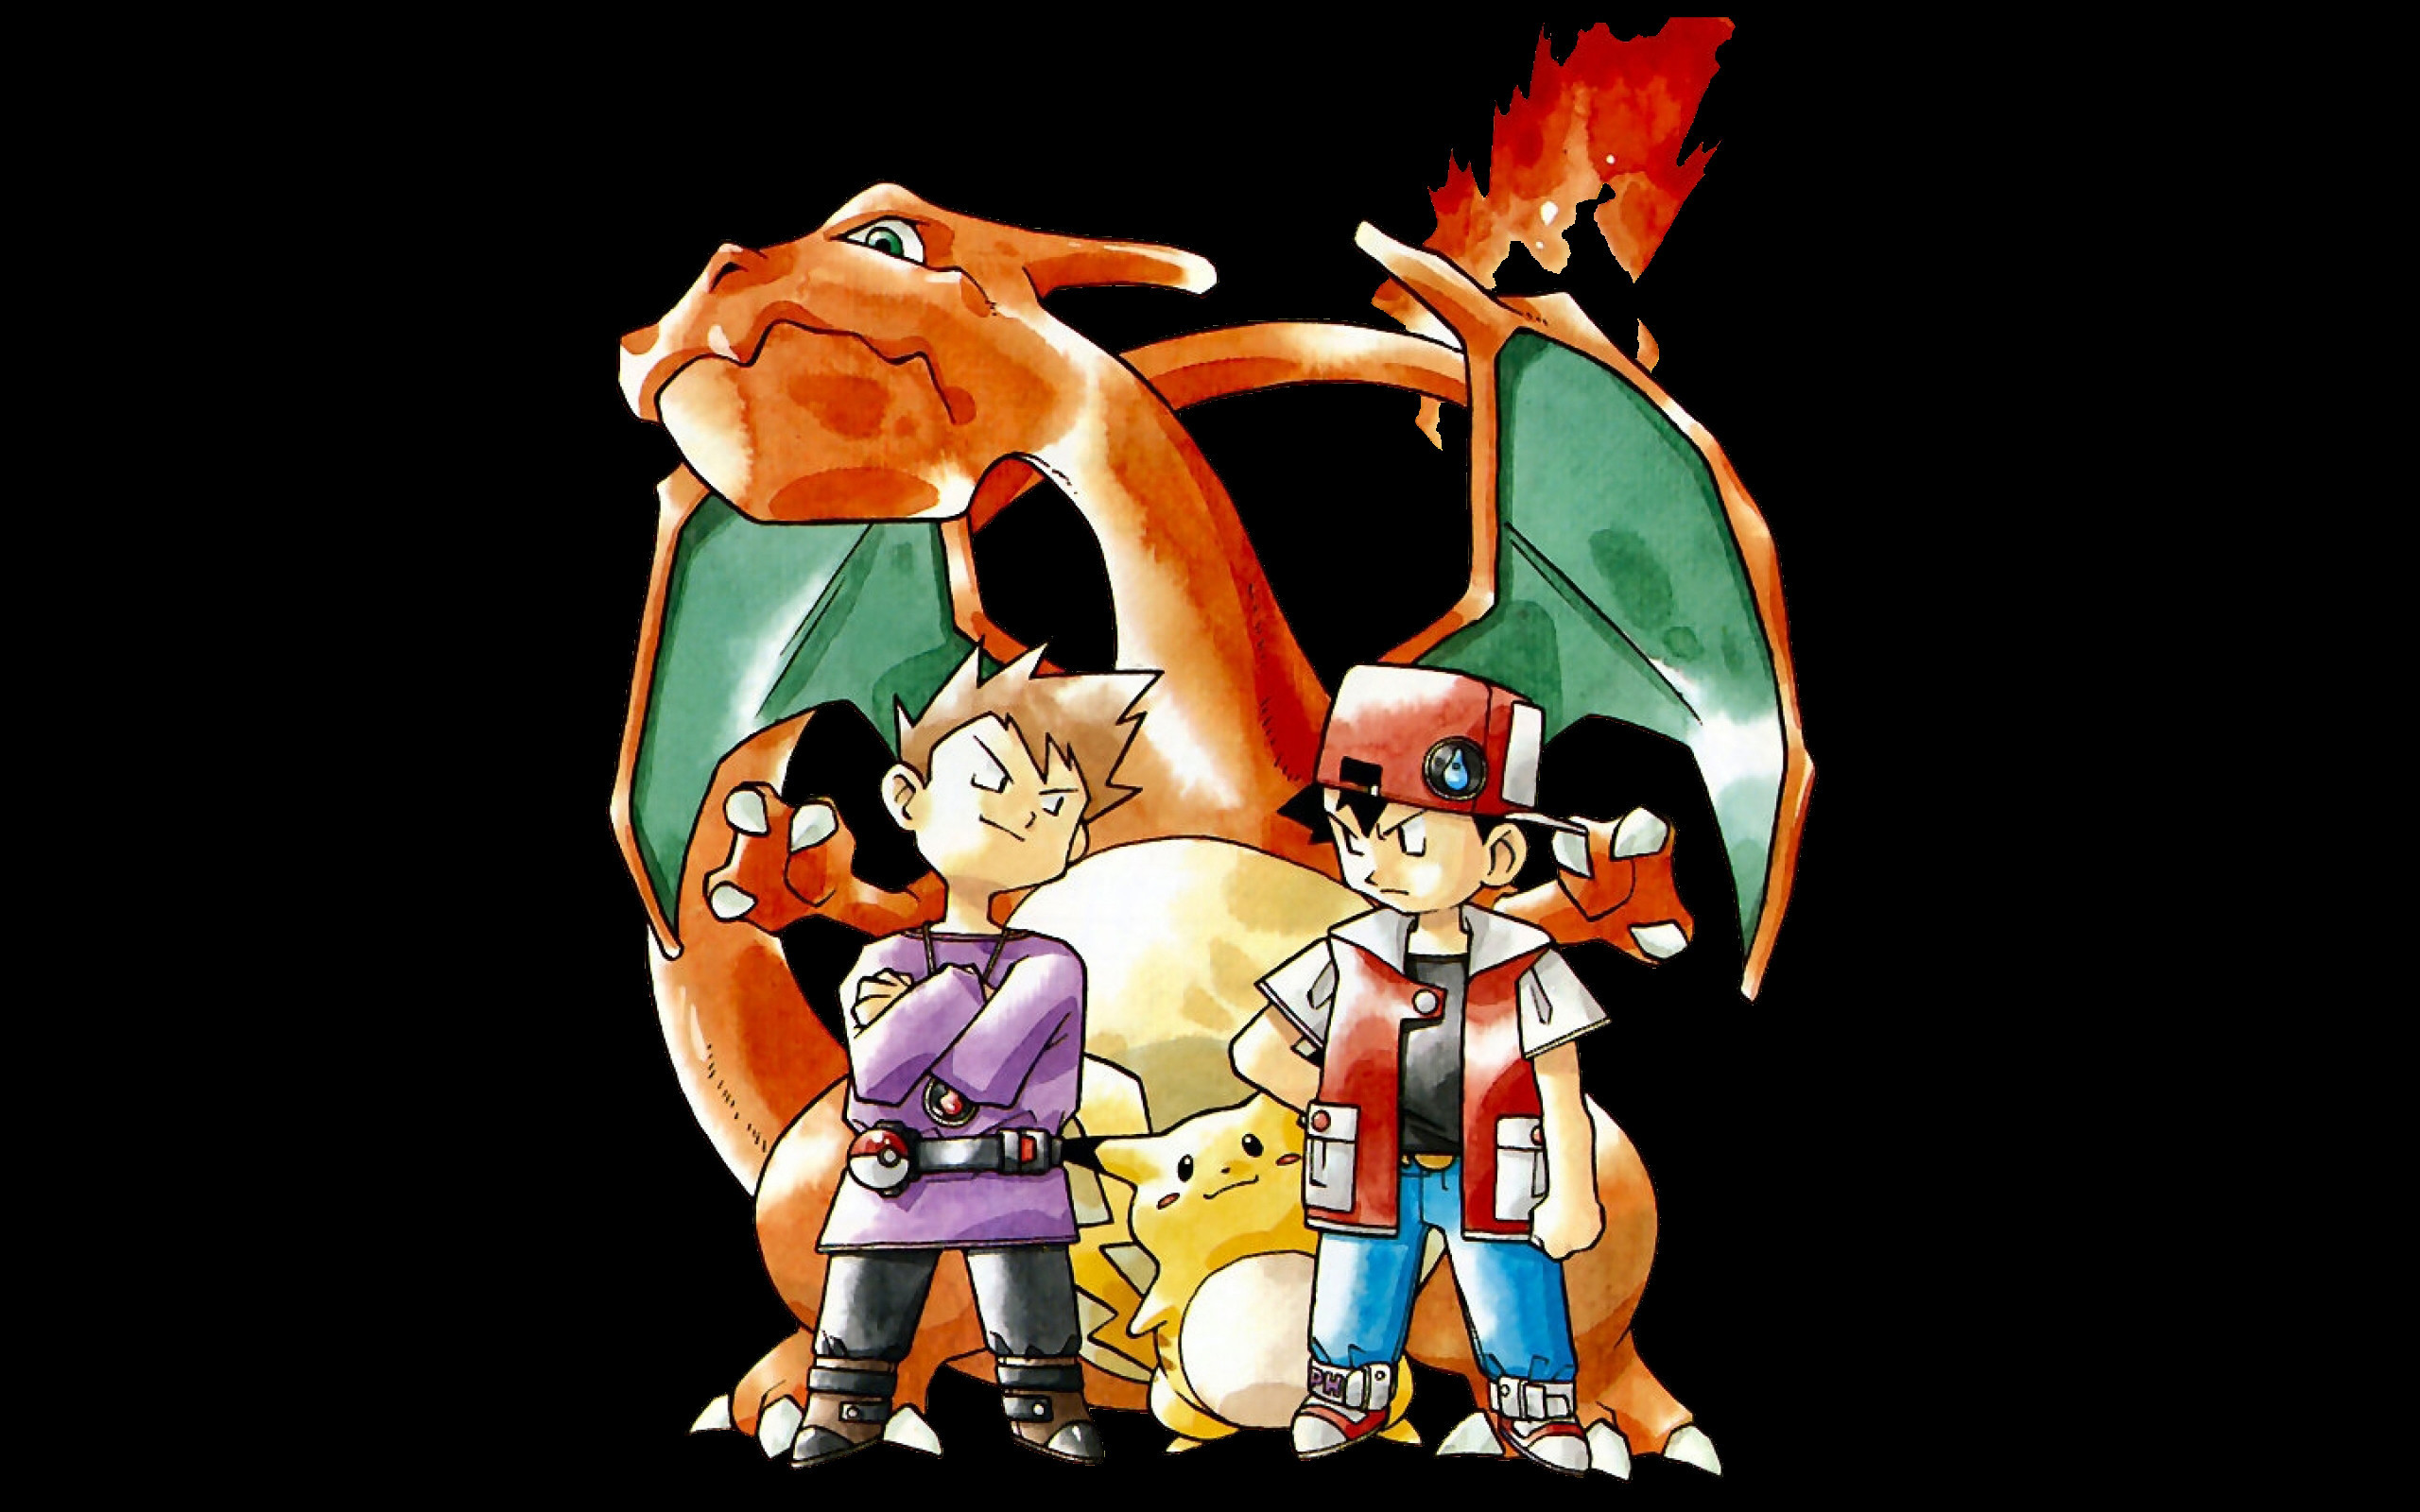 My retro Pokemon Red Blue wallpaper. Super high resolution. Also make note of how different Pikachu and Charizard look